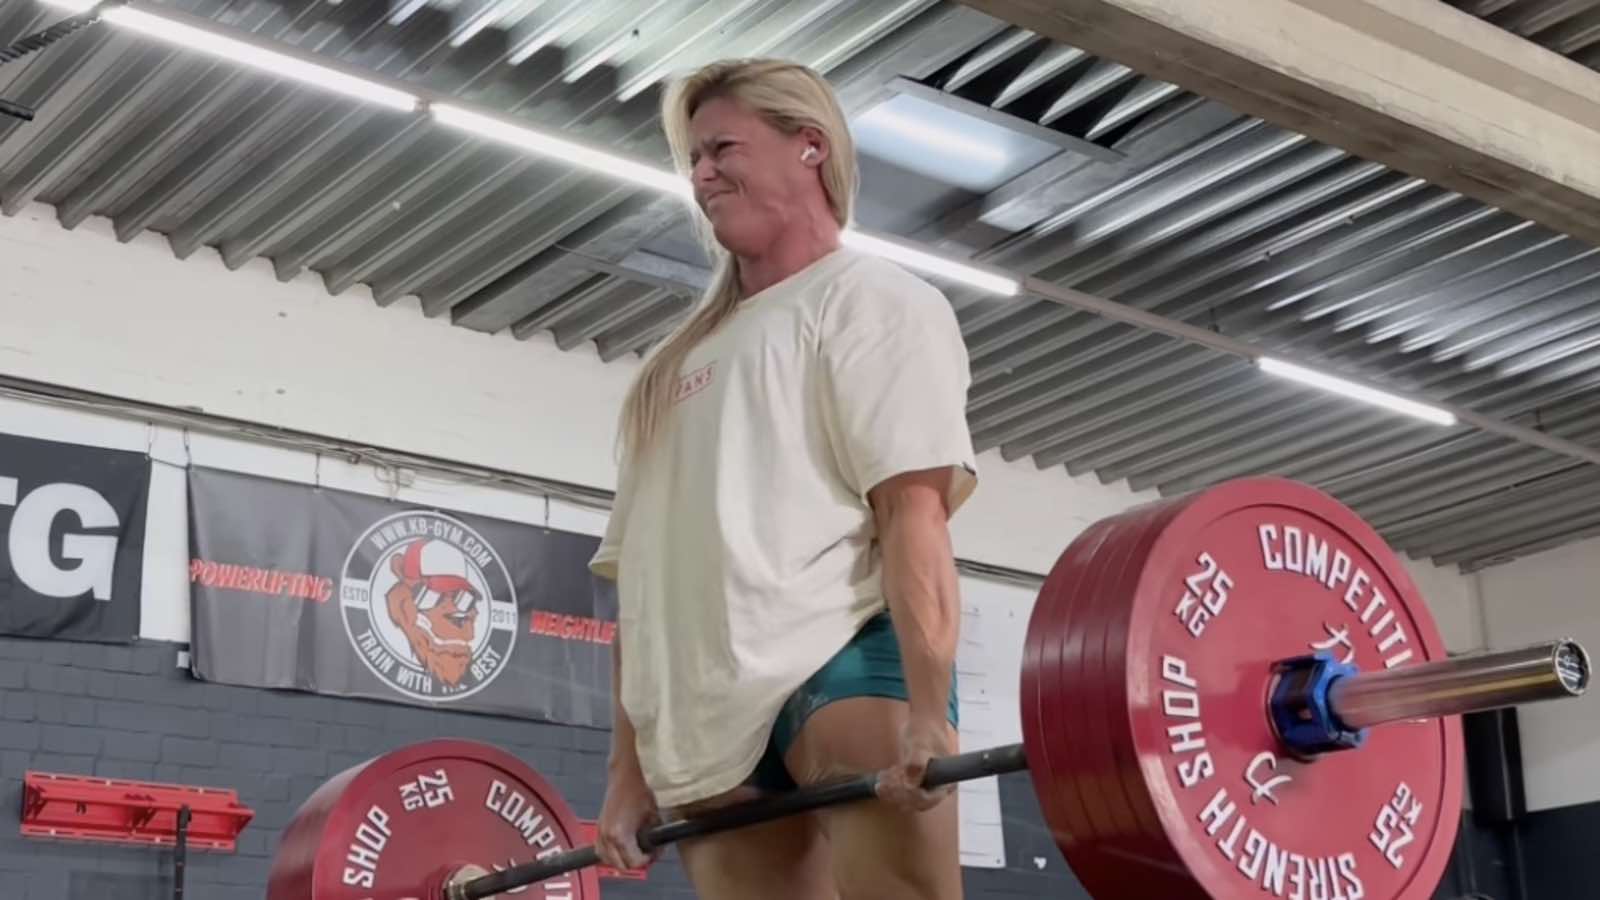 denise-herber-(75kg)-deadlifts-her-all-time-raw-competition-best,-2699-kilograms-(595.2-pounds),-for-2-reps-–-breaking-muscle